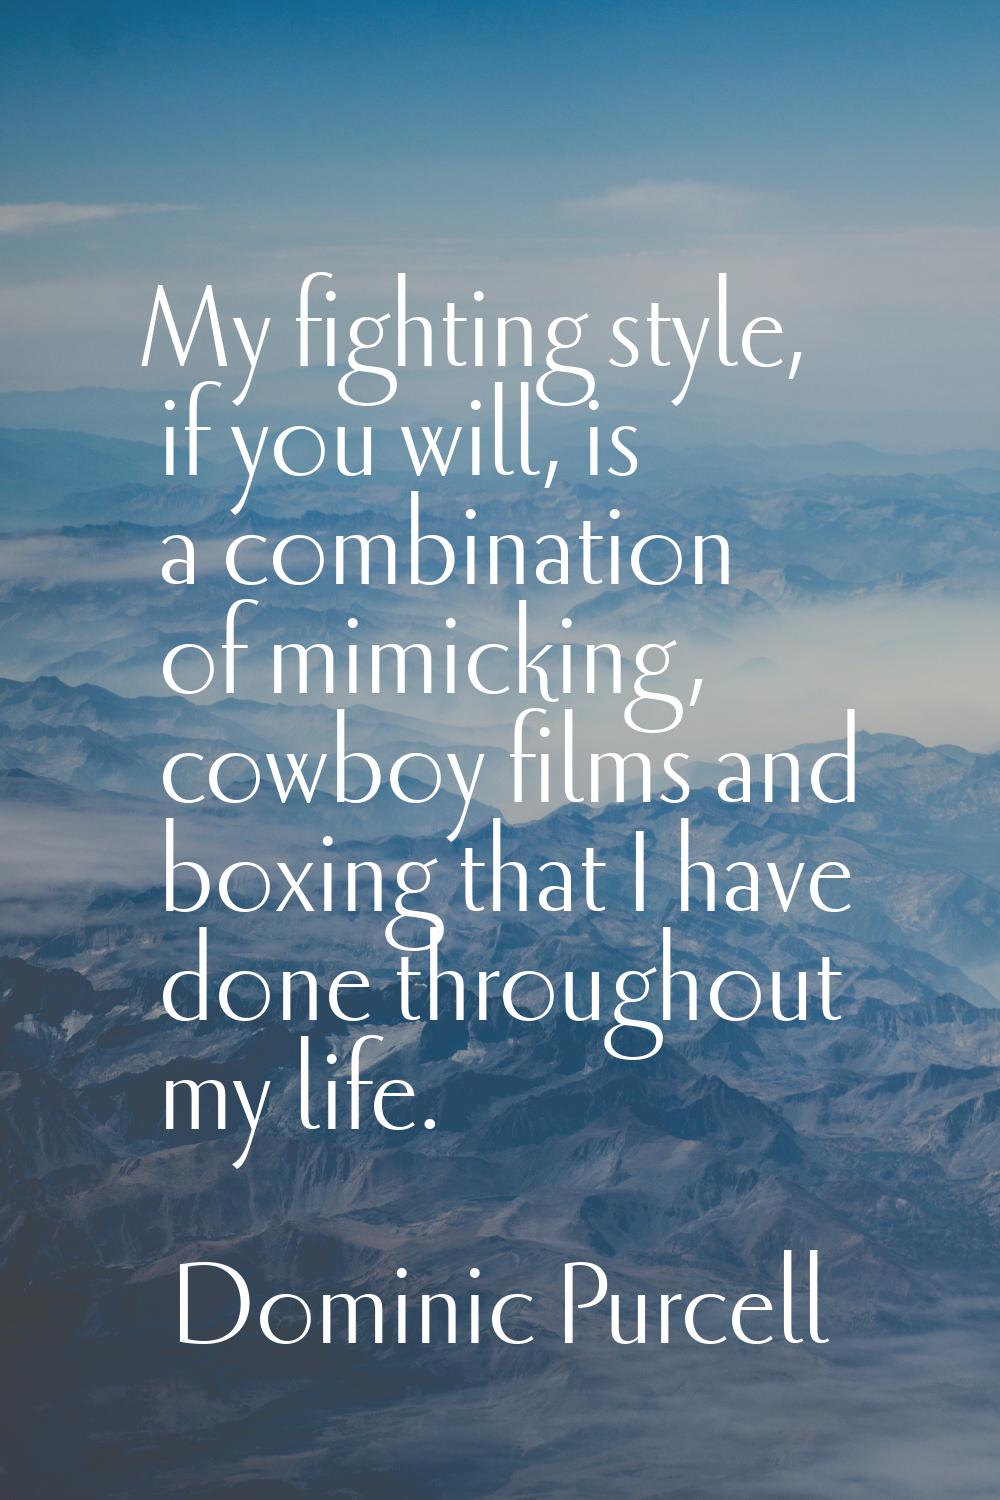 My fighting style, if you will, is a combination of mimicking, cowboy films and boxing that I have 